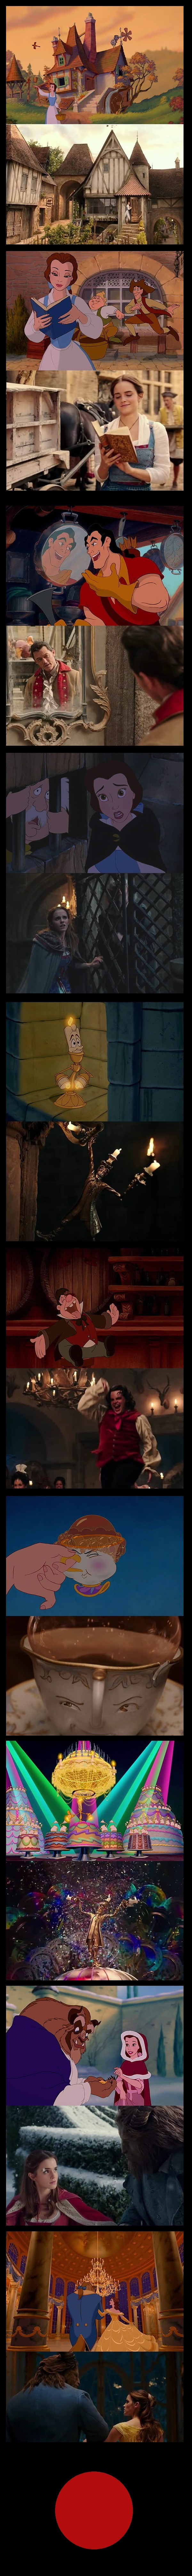 Frame-by-frame comparison of the cartoon (1991) and the movie (2017) Beauty and the Beast. - My, Movies, Gorgeous, The beauty and the Beast, , Cartoons, Frame, Comparison